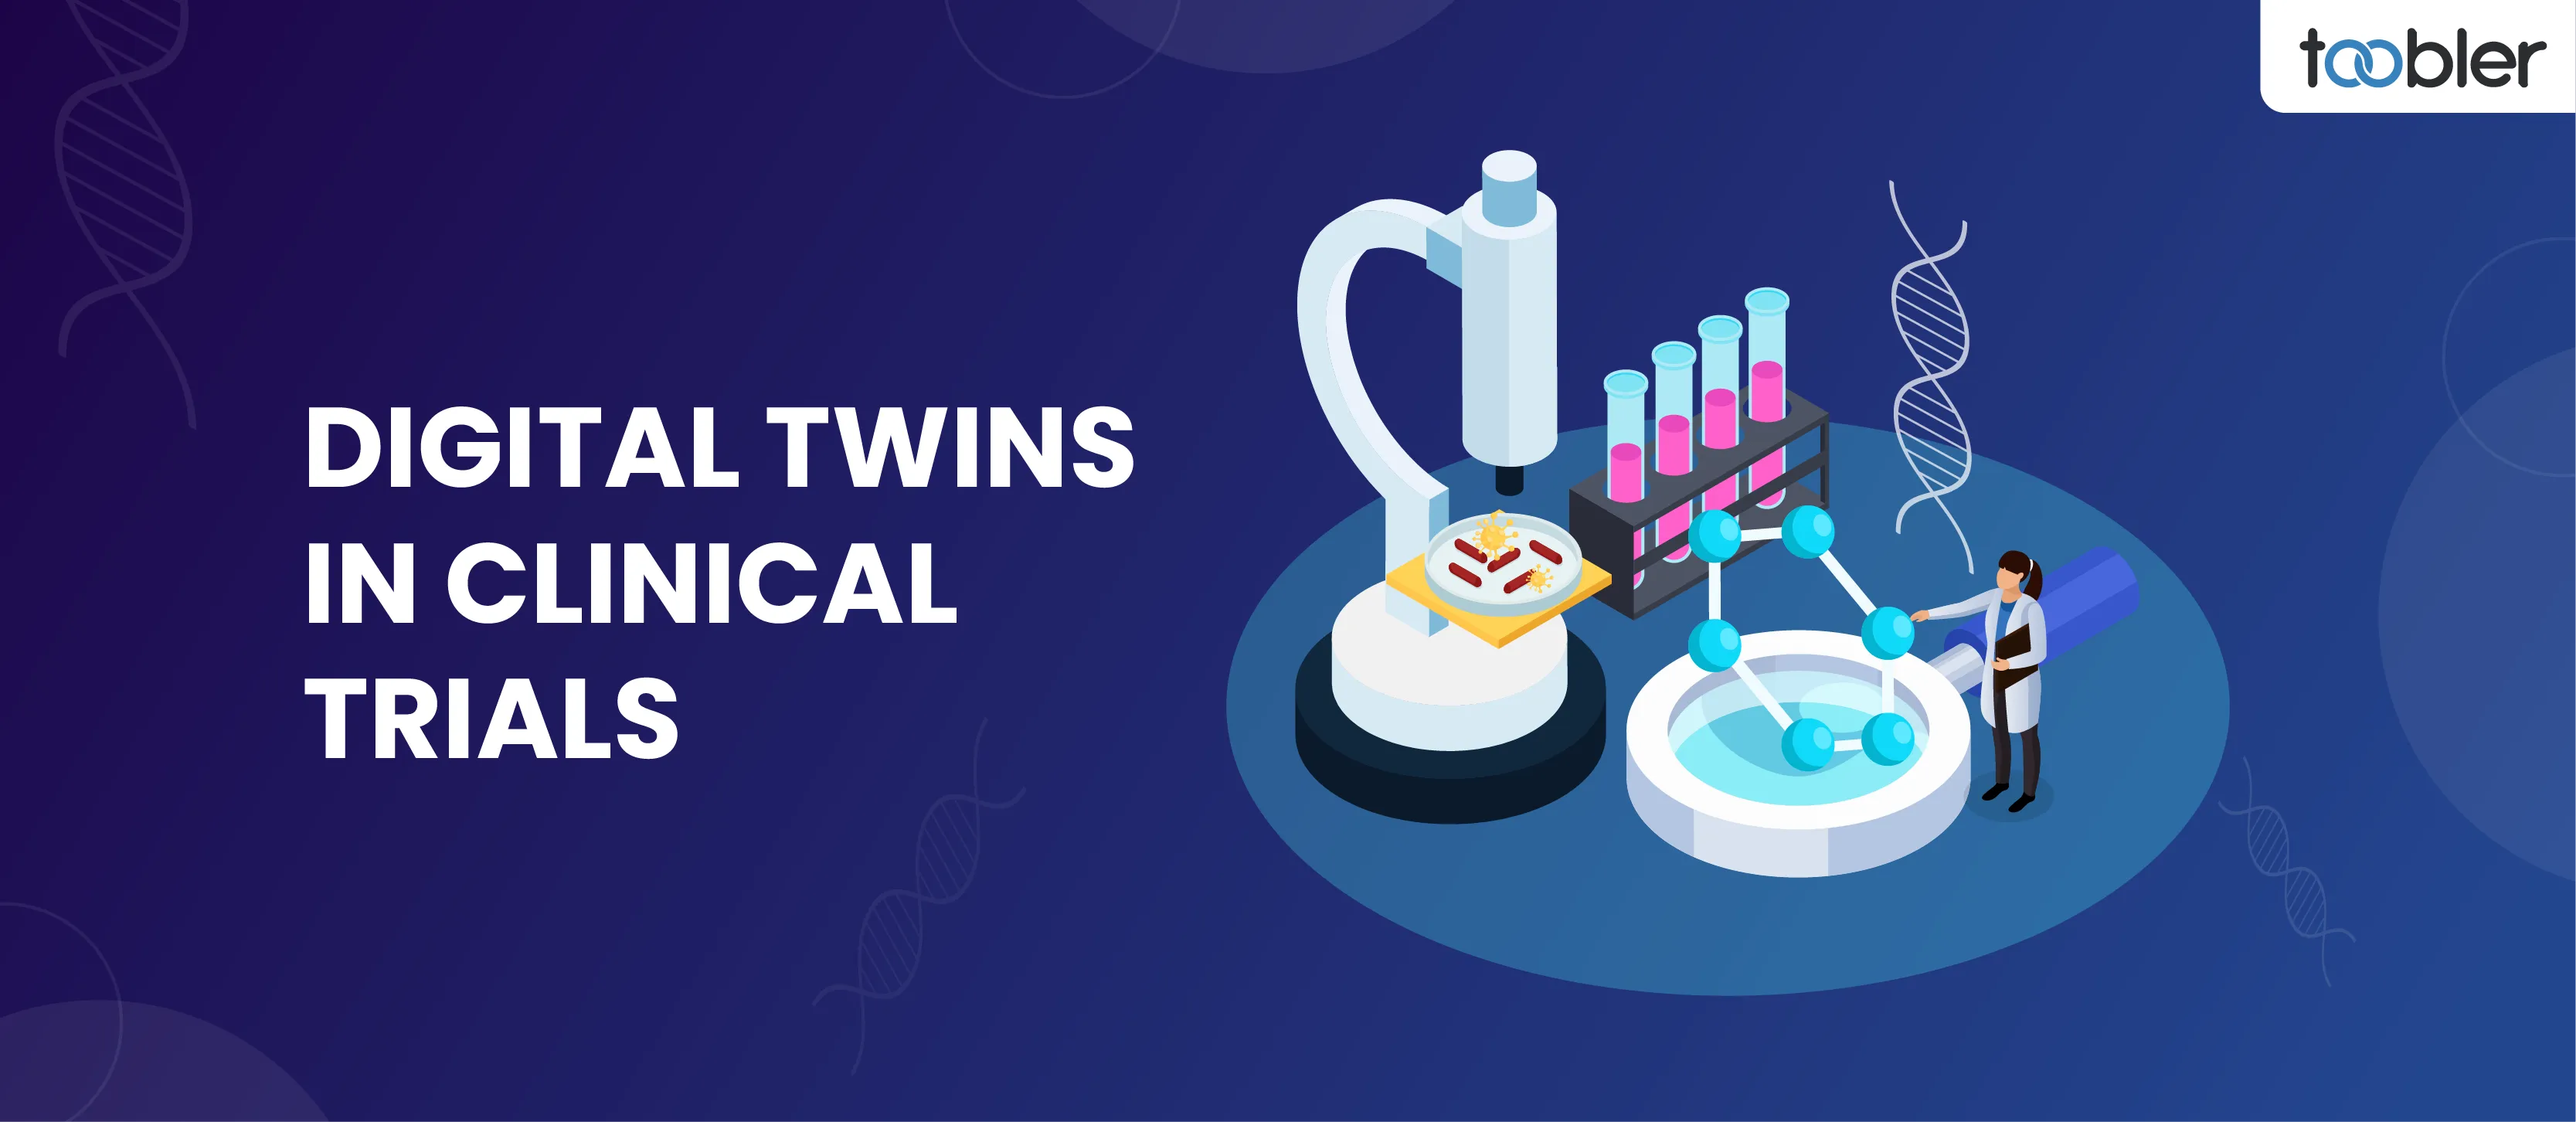 Digital Twins in Clinical Trials: Benefits & Use Cases